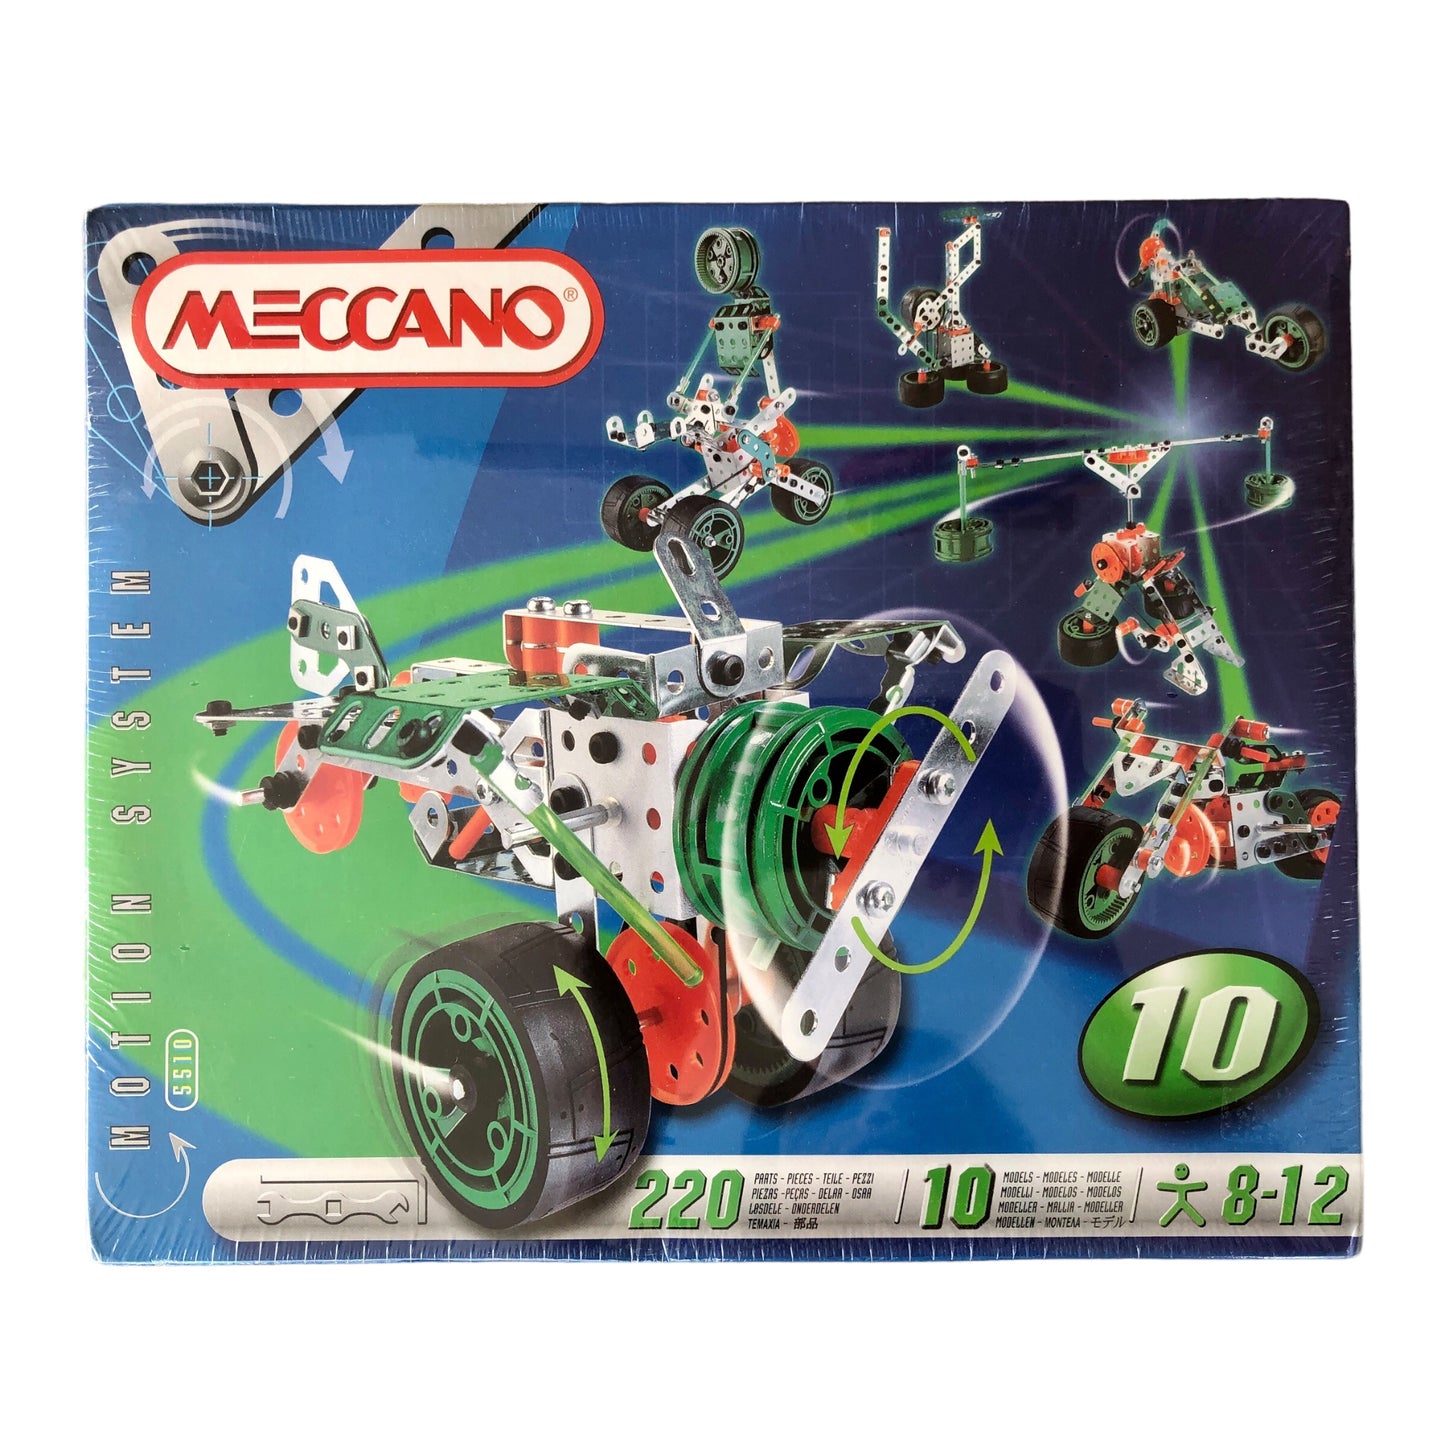 Meccano Motion System 5510 - 220 Teile - 10 Modelle